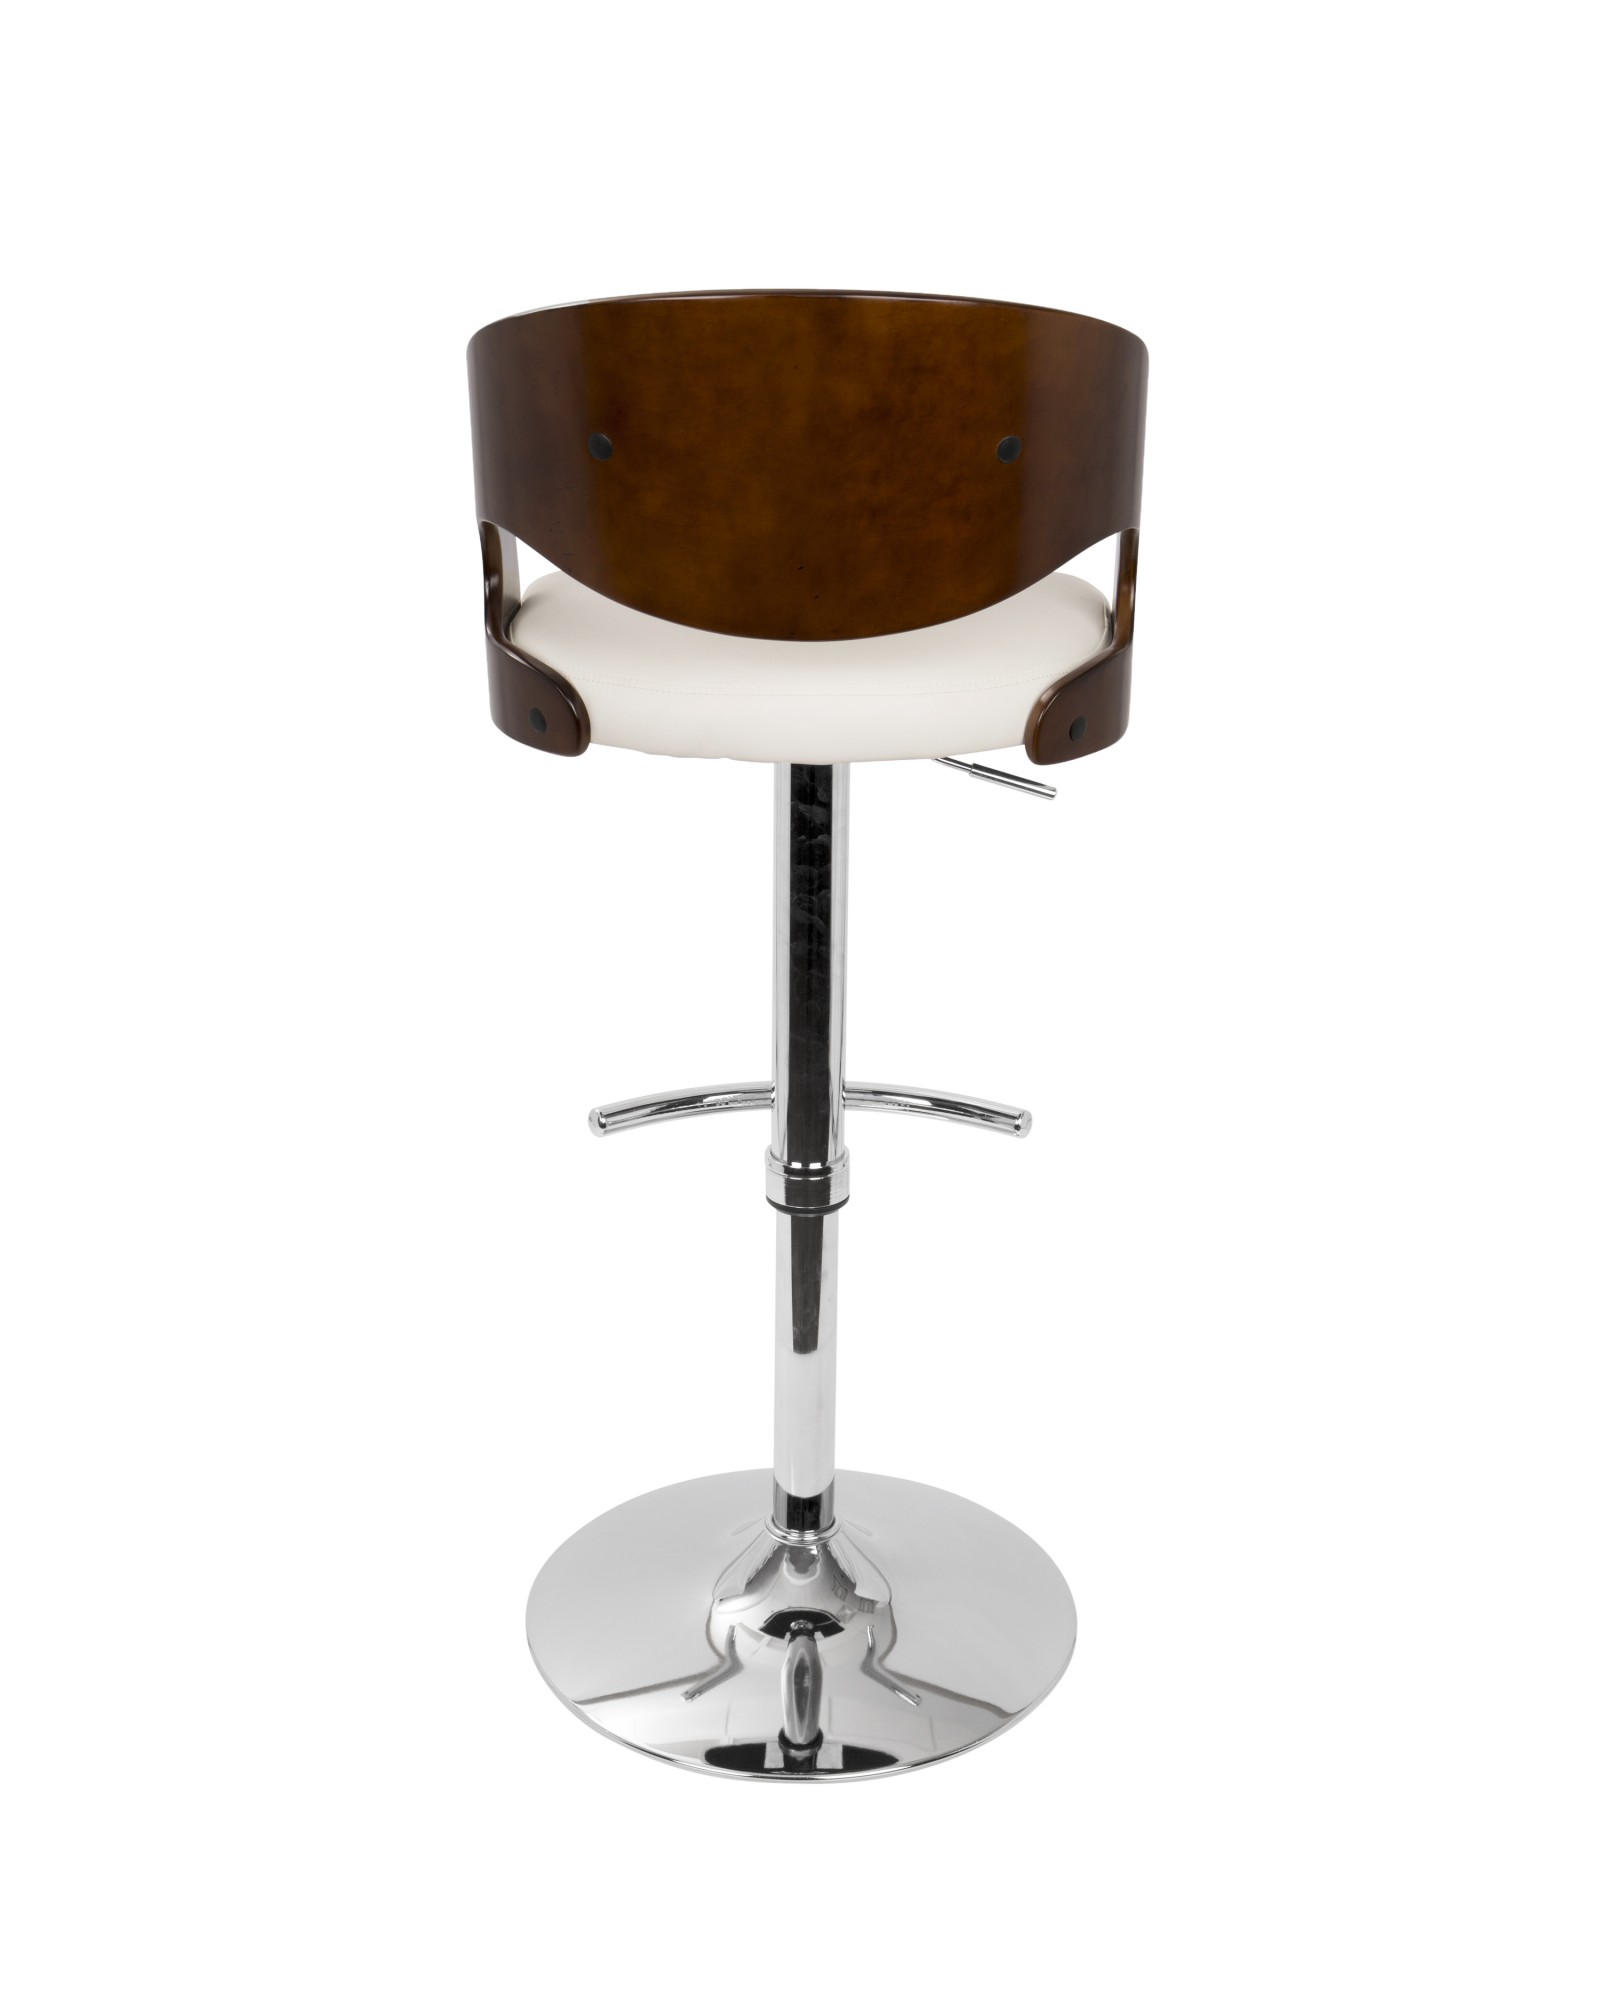 Pino Mid-Century Modern Adjustable Barstool with Swivel in Cherry and White Faux Leather